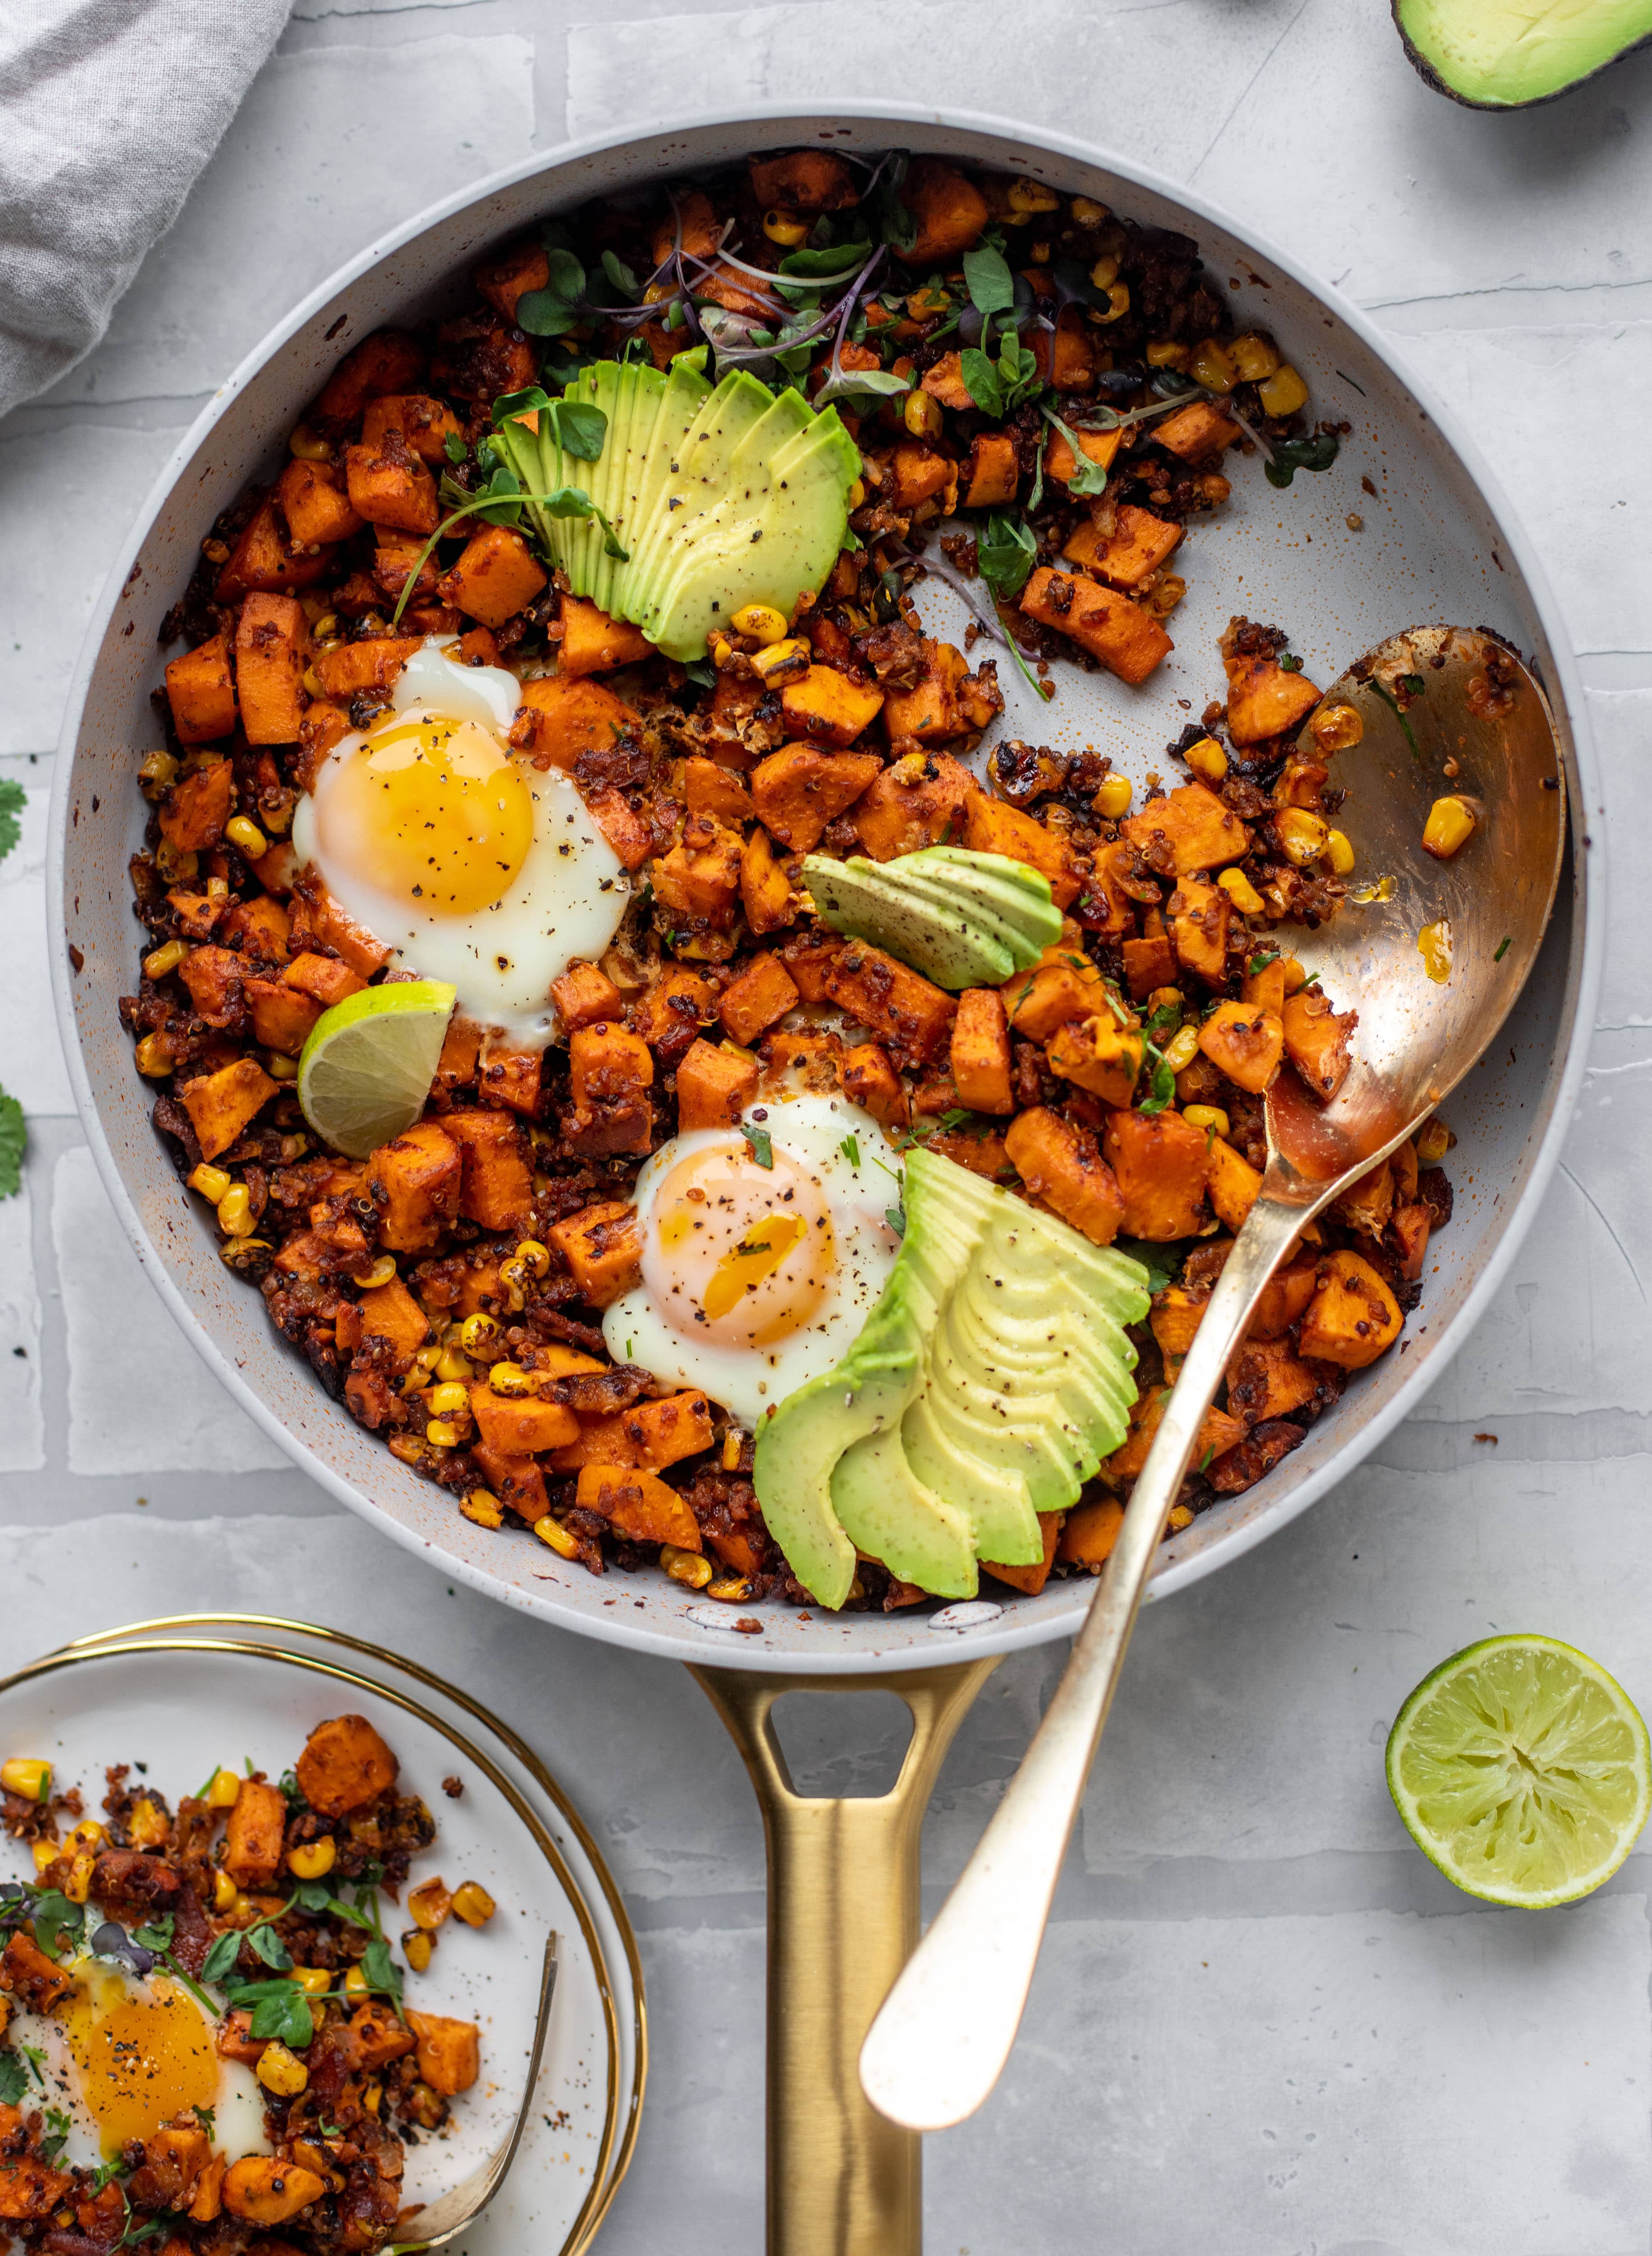 This chipotle sweet potato hash is perfect for breakfast, lunch or dinner. Bulked up with quinoa and tons of flavor, it's a great pantry weeknight meal!